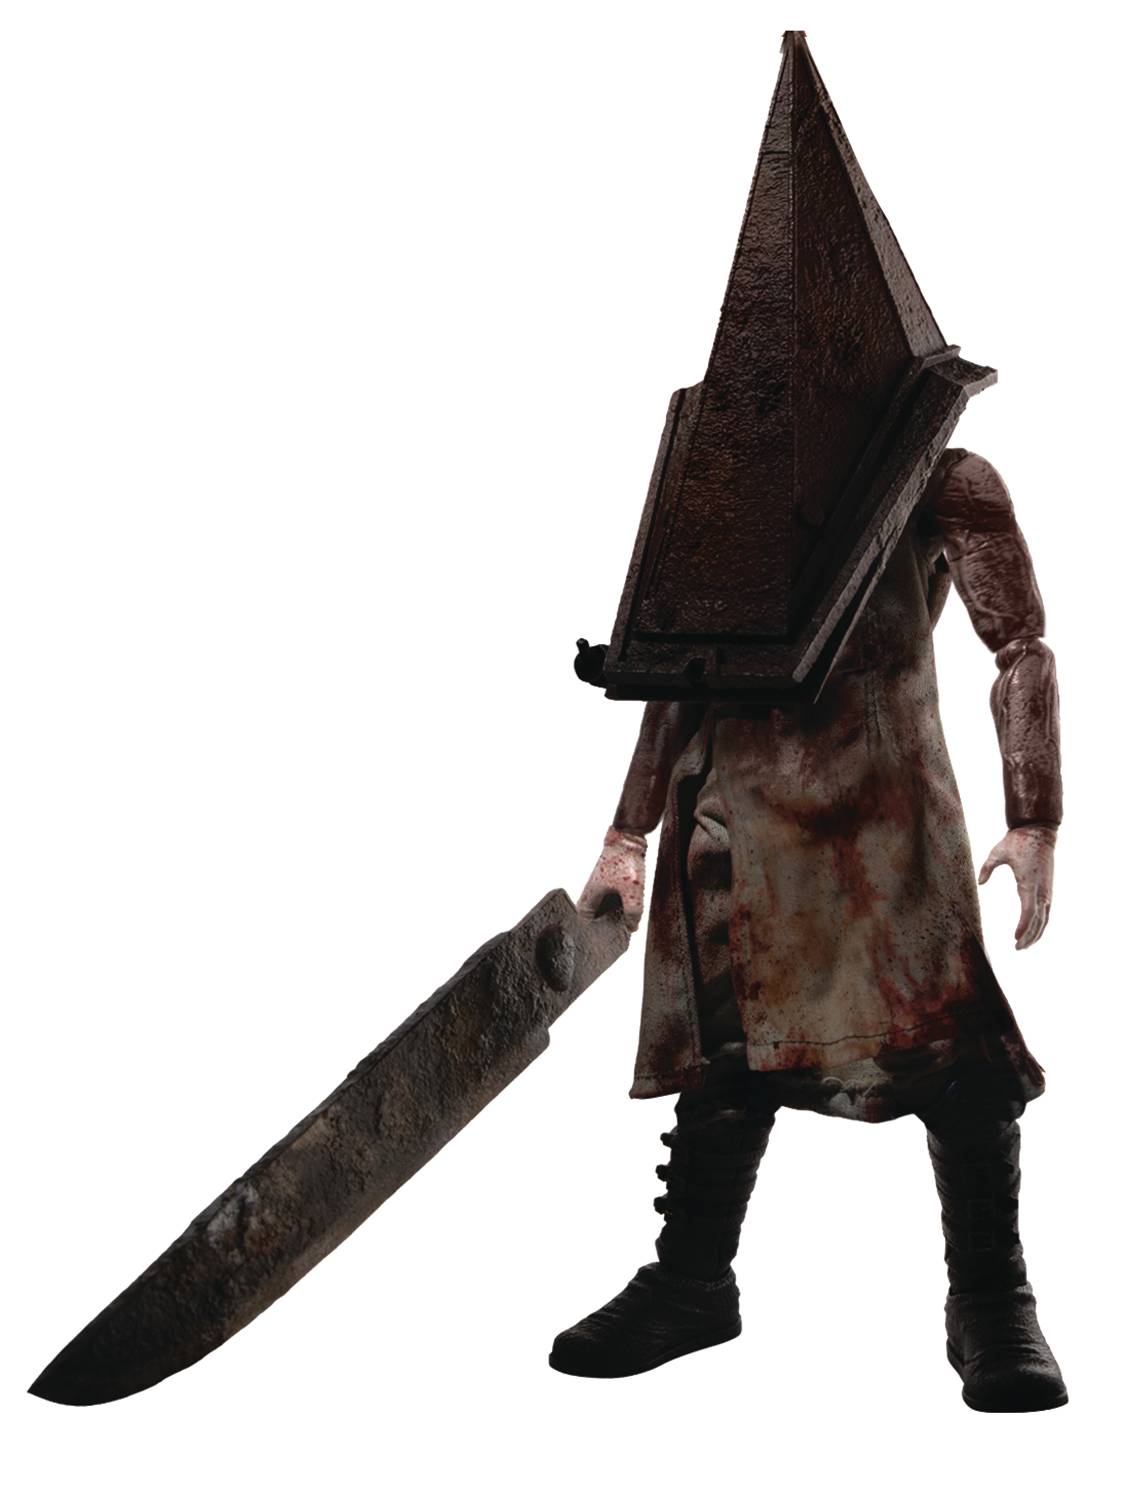 MEZCO - Silent Hill 2: Red Pyramid Thing One:12 Collective Action Figure